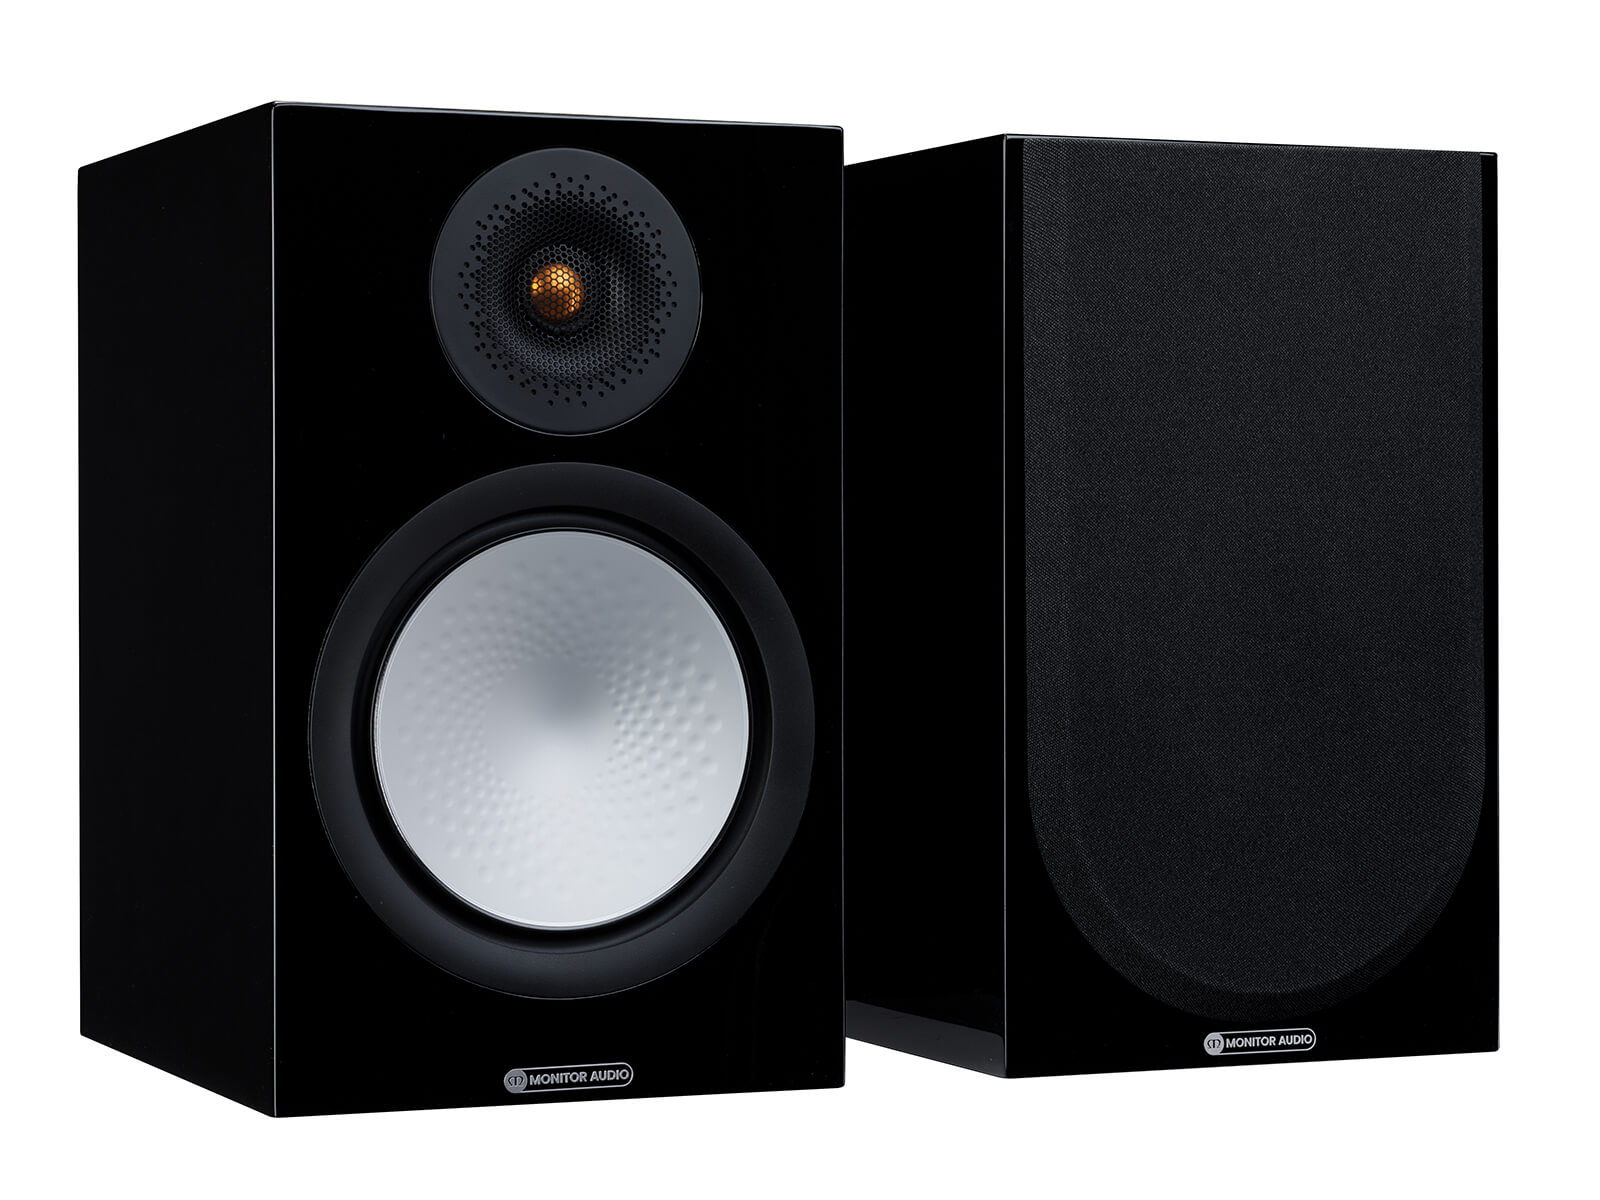 A pair of Monitor Audio's Silver 100 7G, in a high gloss black finish, iso view, with and without grilles.